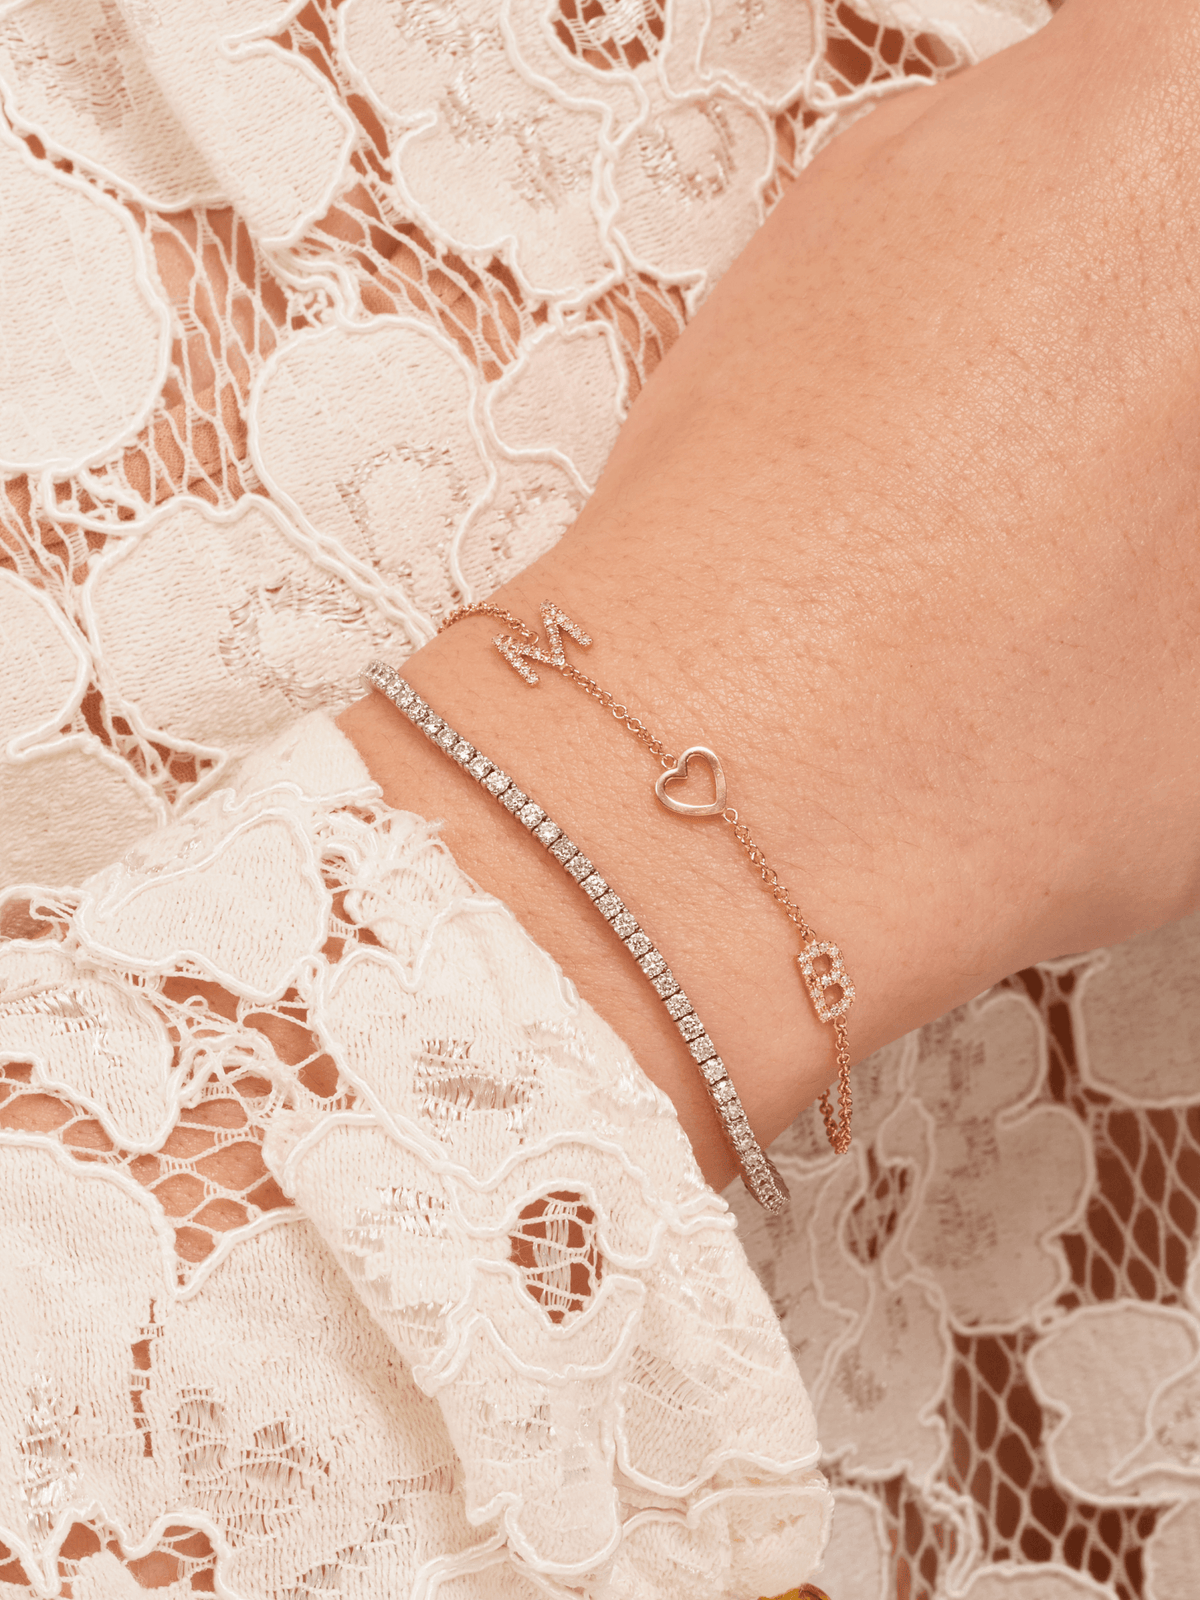 Dainty gold chain bracelet with two pave diamond initials and gold heart layered with diamond tennis bracelet